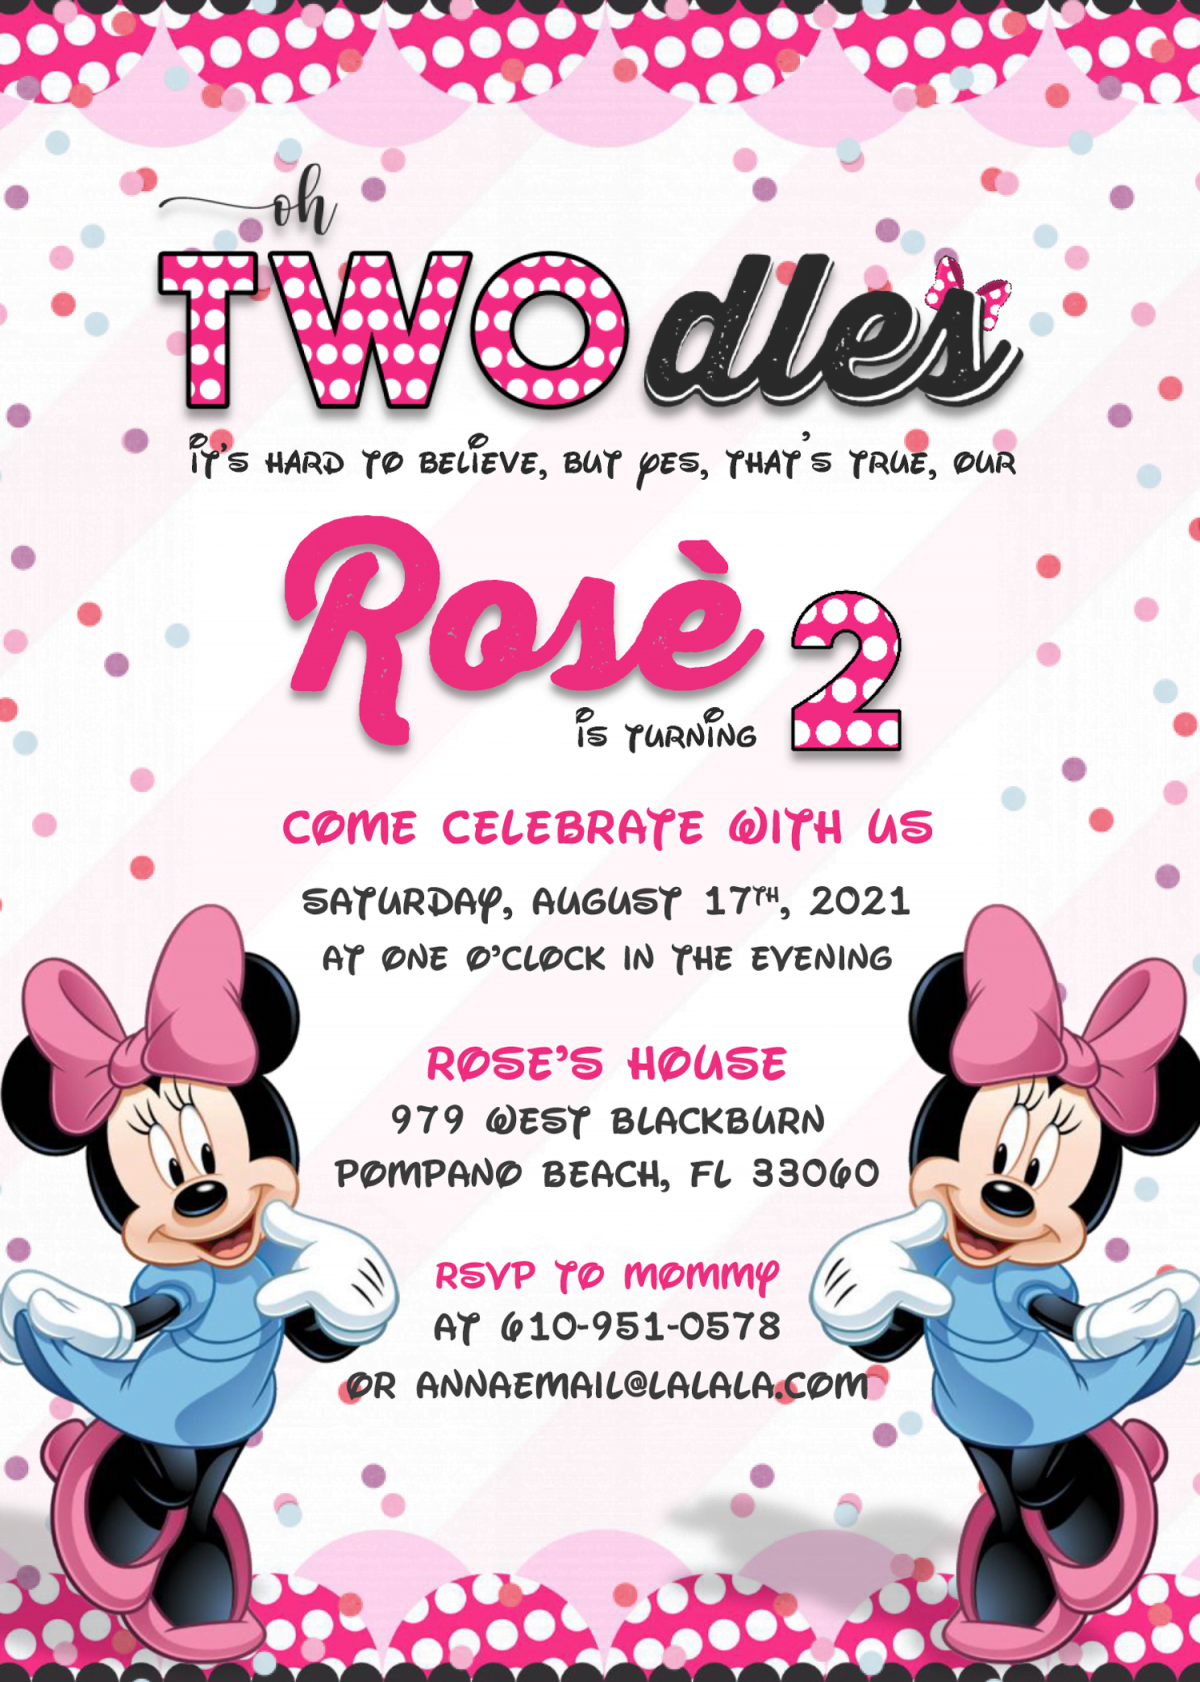 Minnie Mouse Invitation Templates - Editable With MS Word and has cute and pink font styles